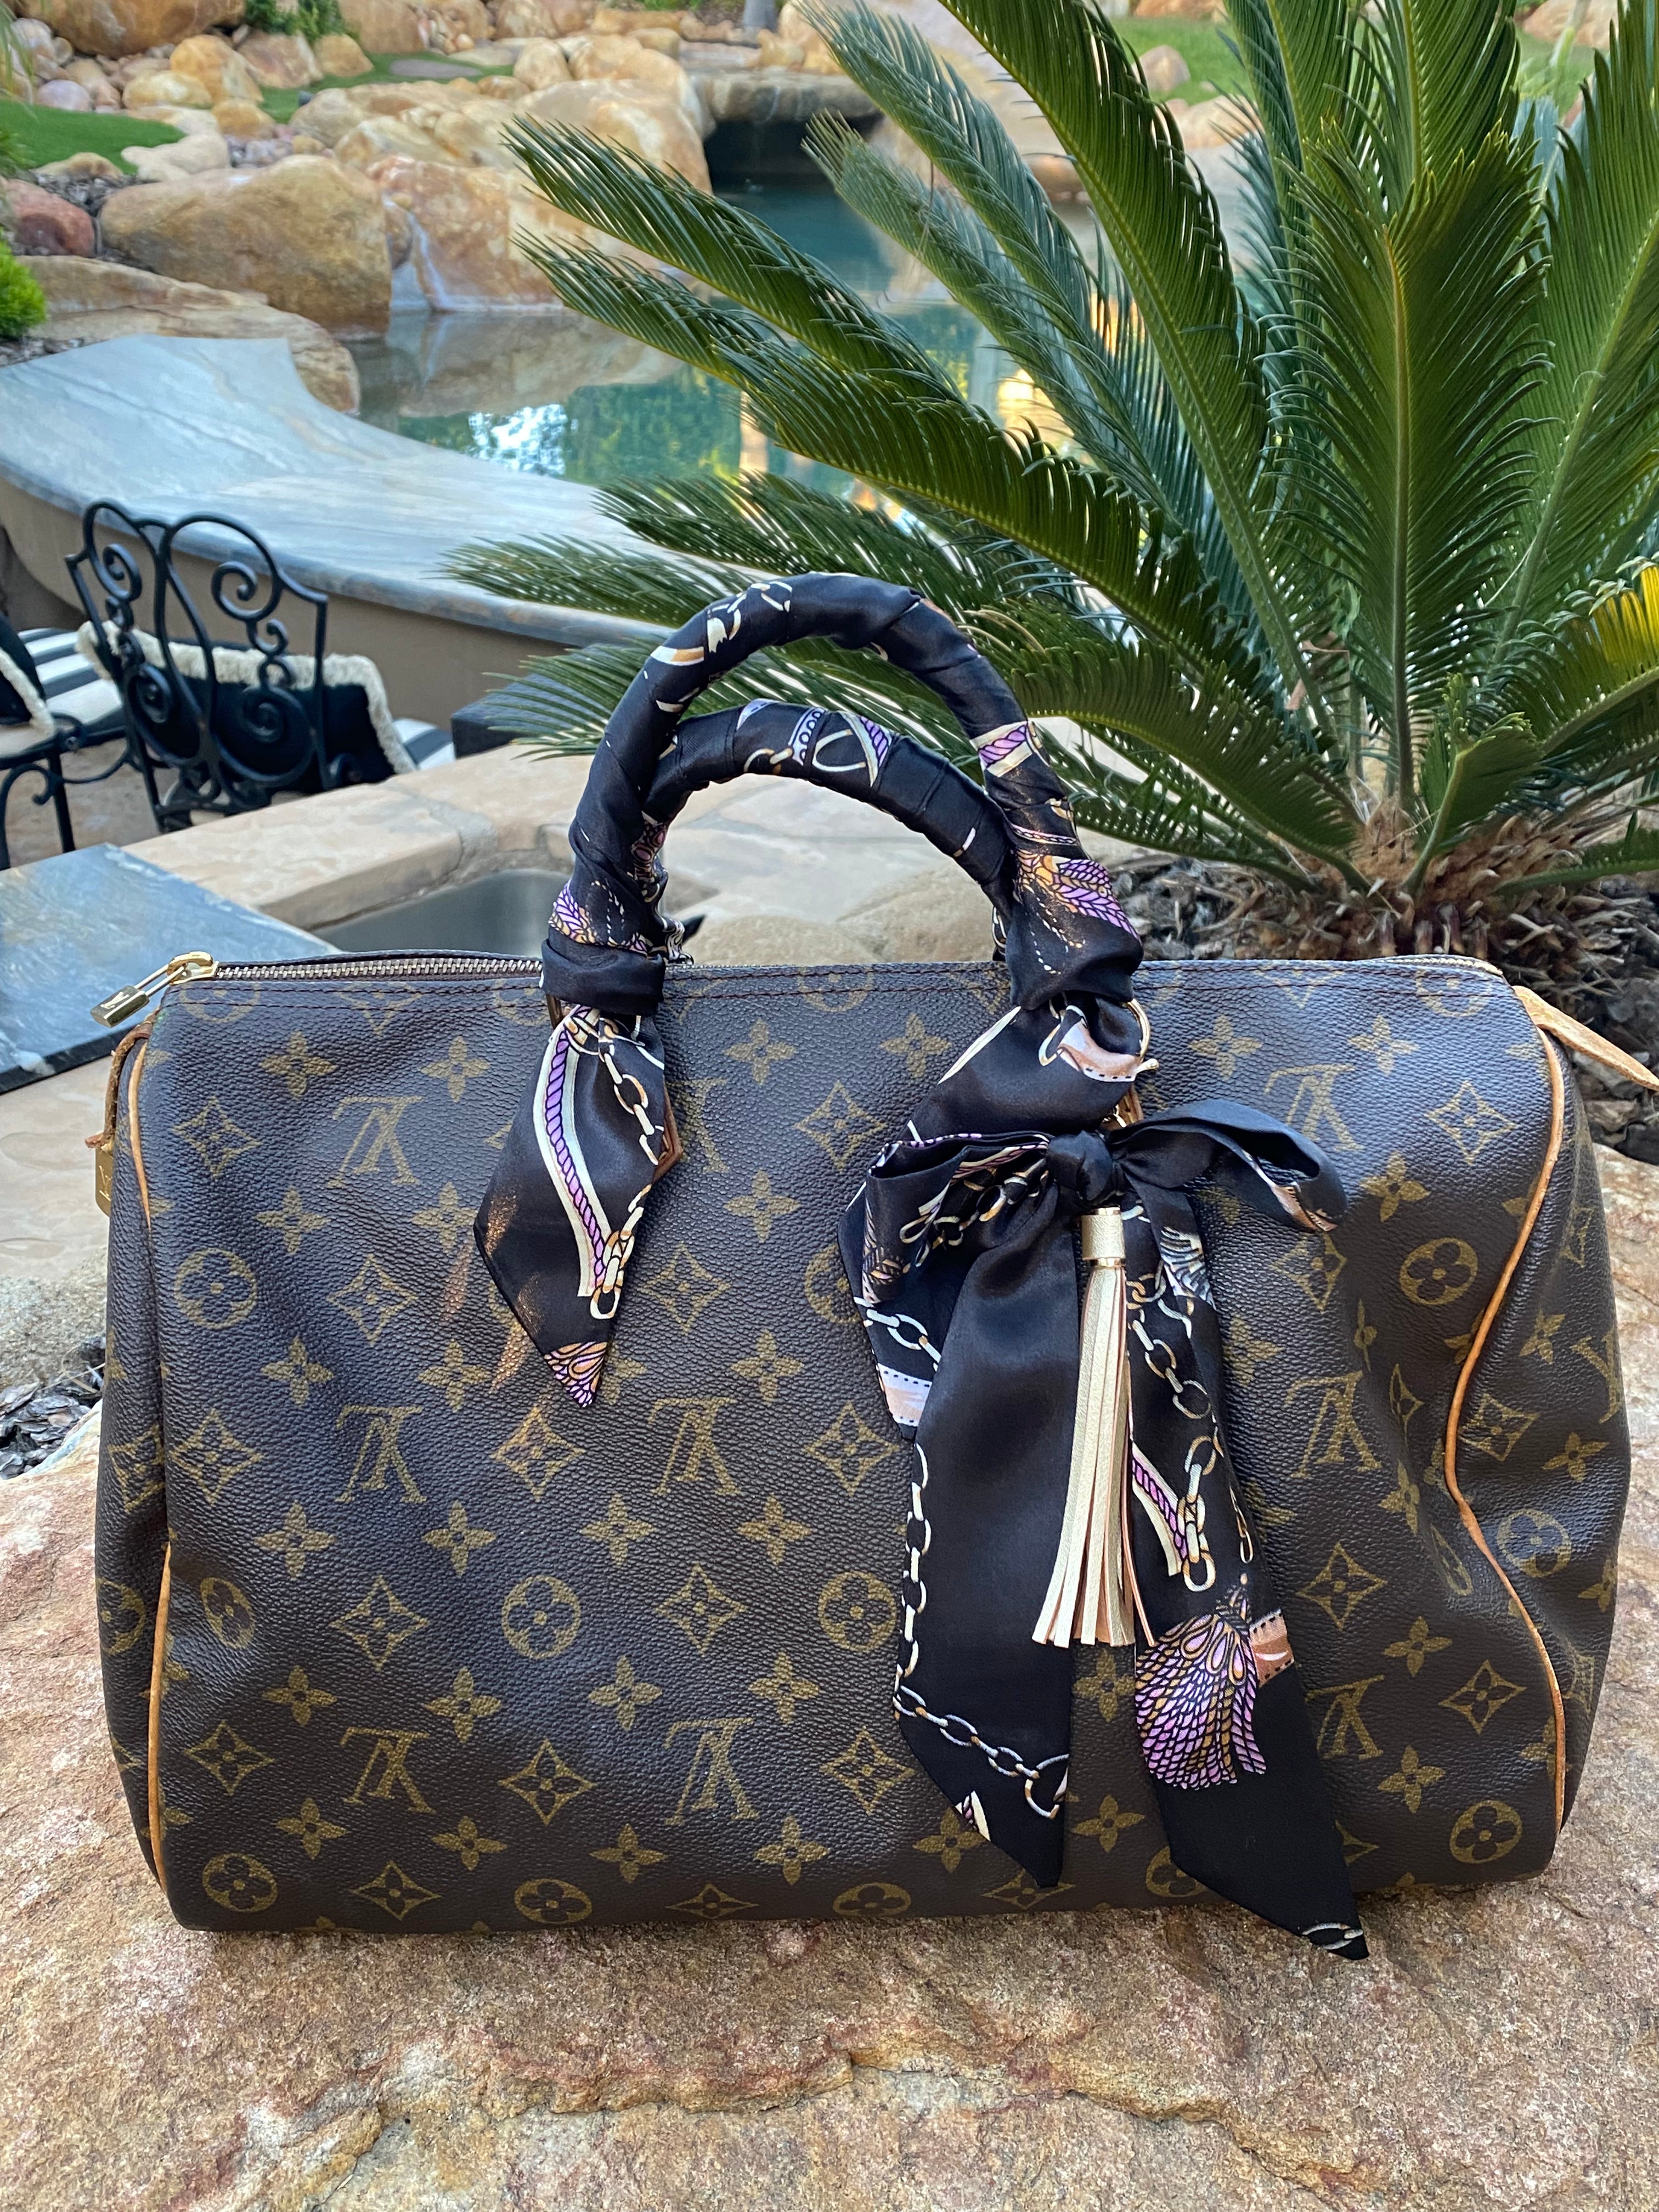 louis vuitton speedy 35 used and real｜TikTok Search